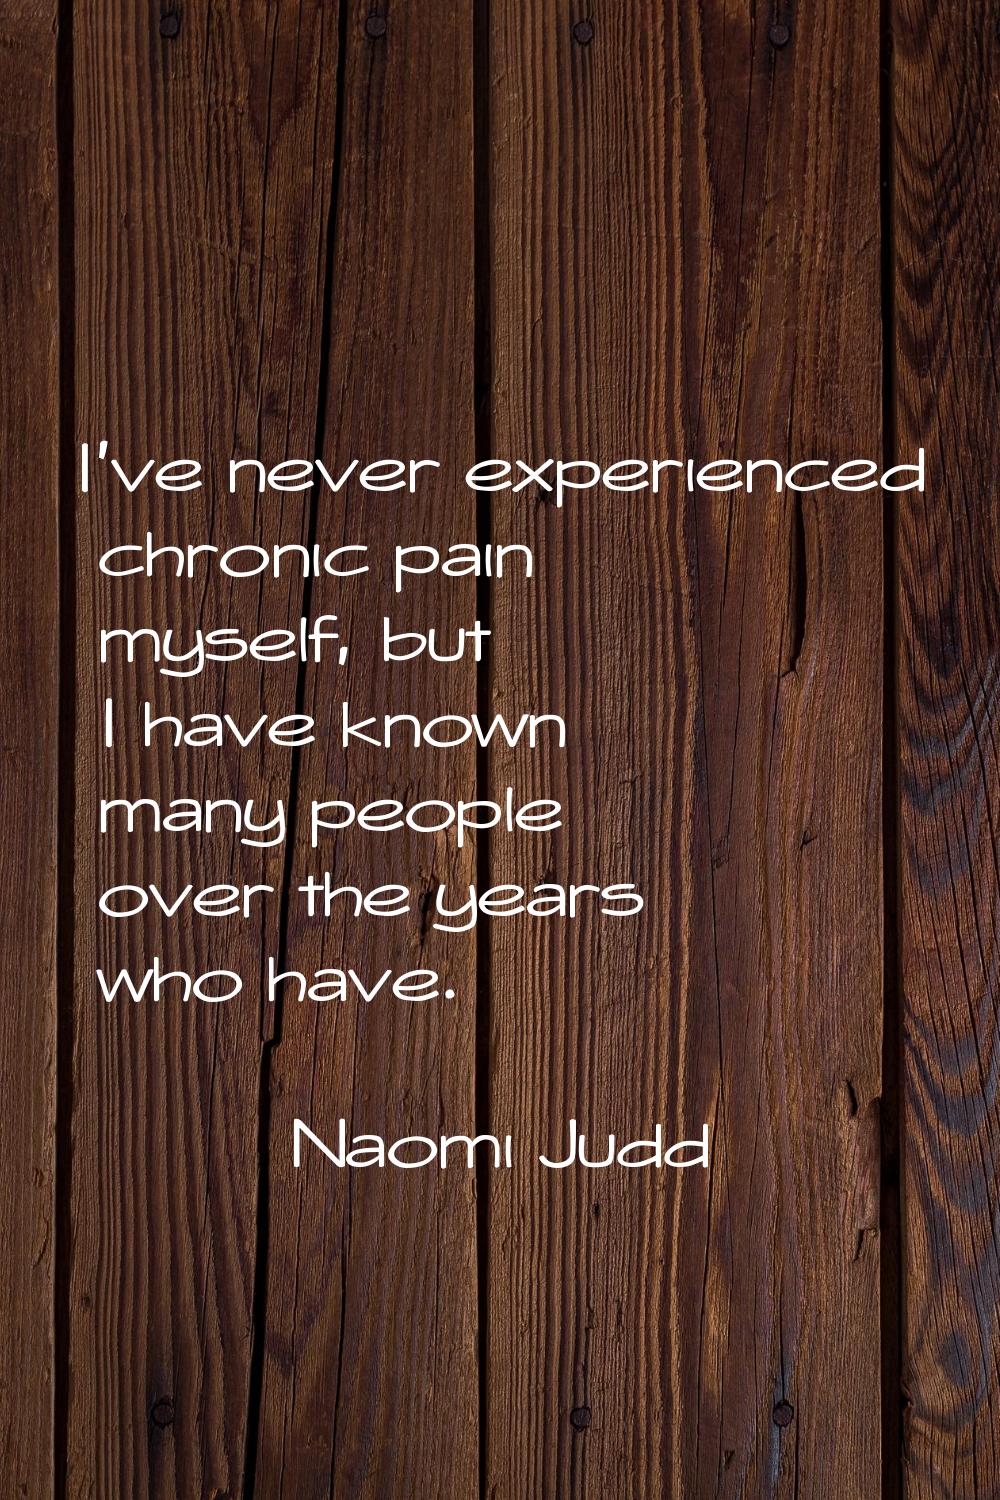 I've never experienced chronic pain myself, but I have known many people over the years who have.